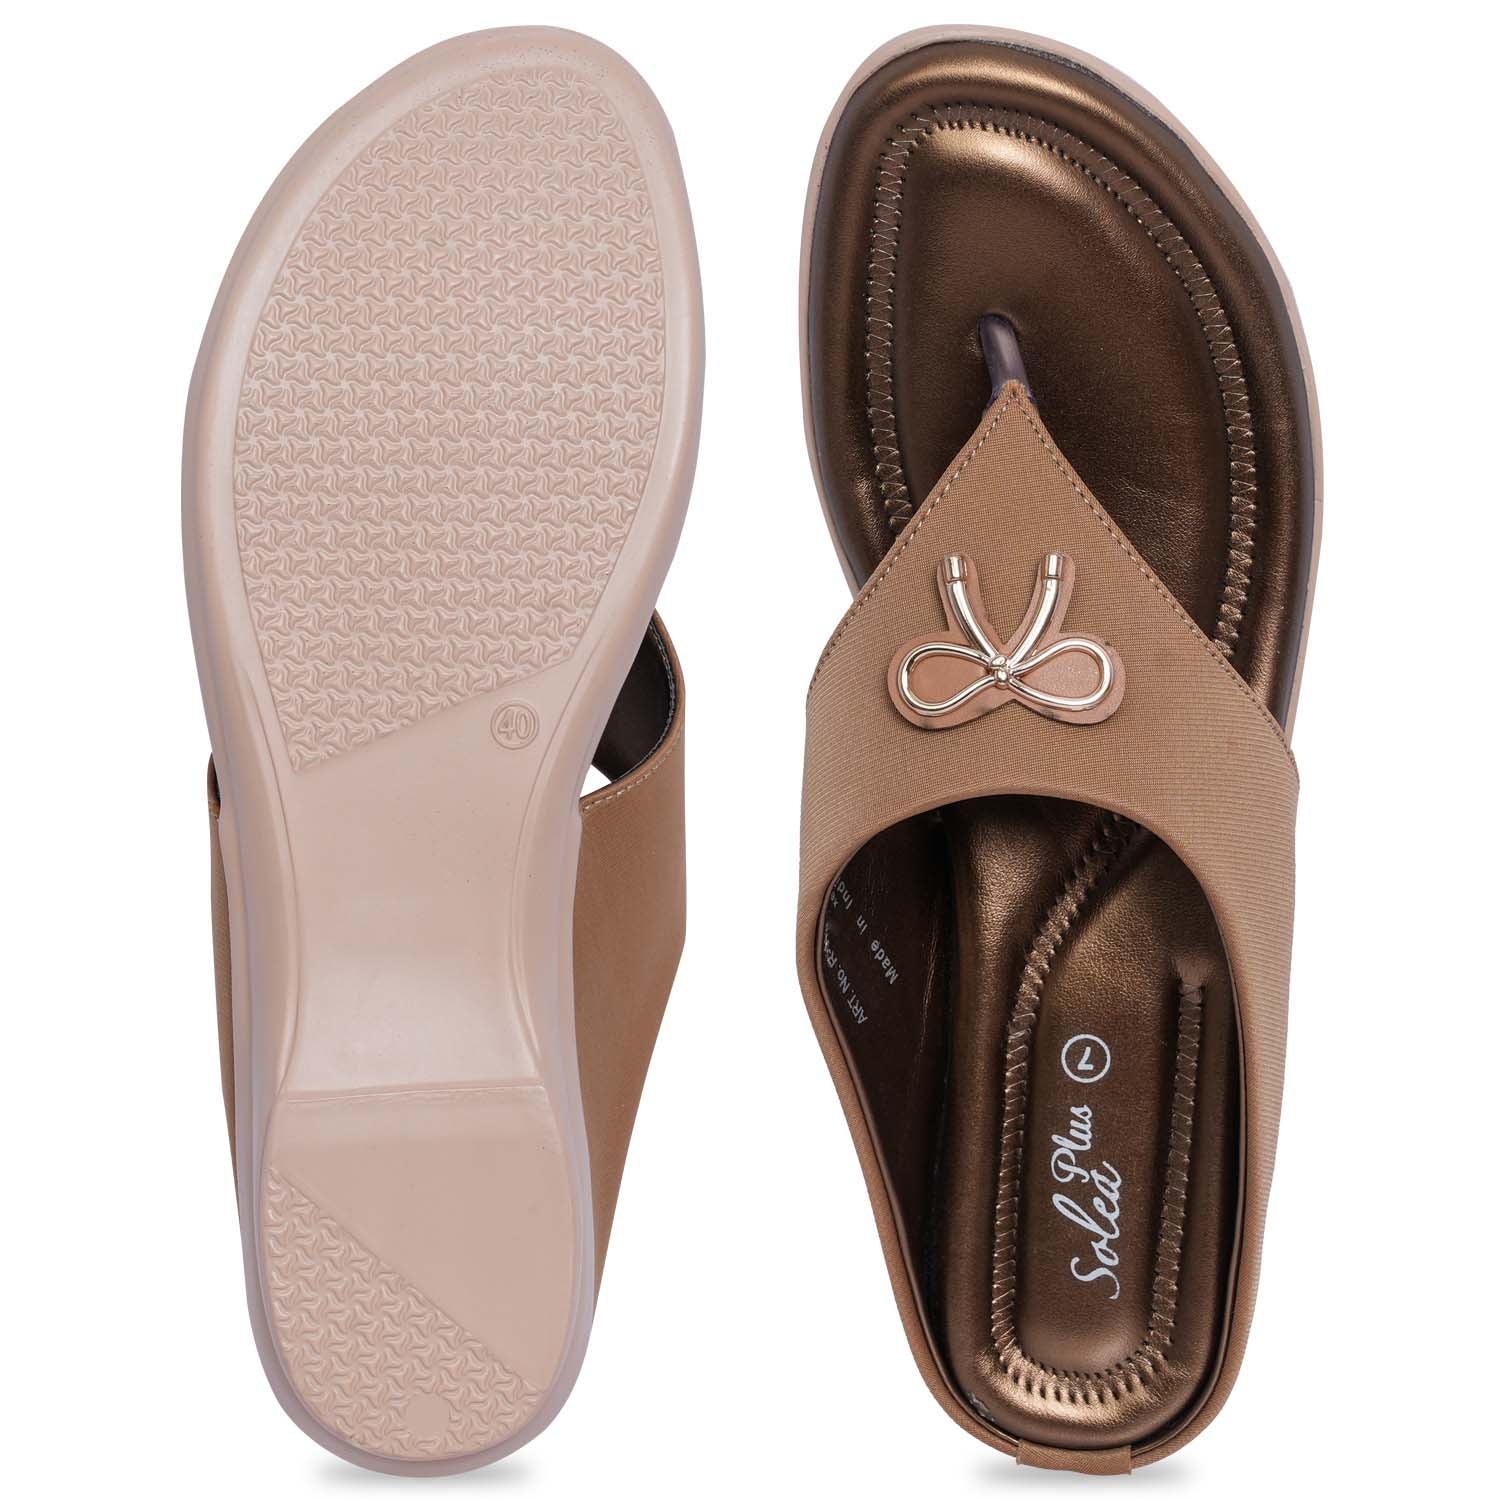 Paragon R1013L Women Sandals | Casual &amp; Formal Sandals | Stylish, Comfortable &amp; Durable | For Daily &amp; Occasion Wear